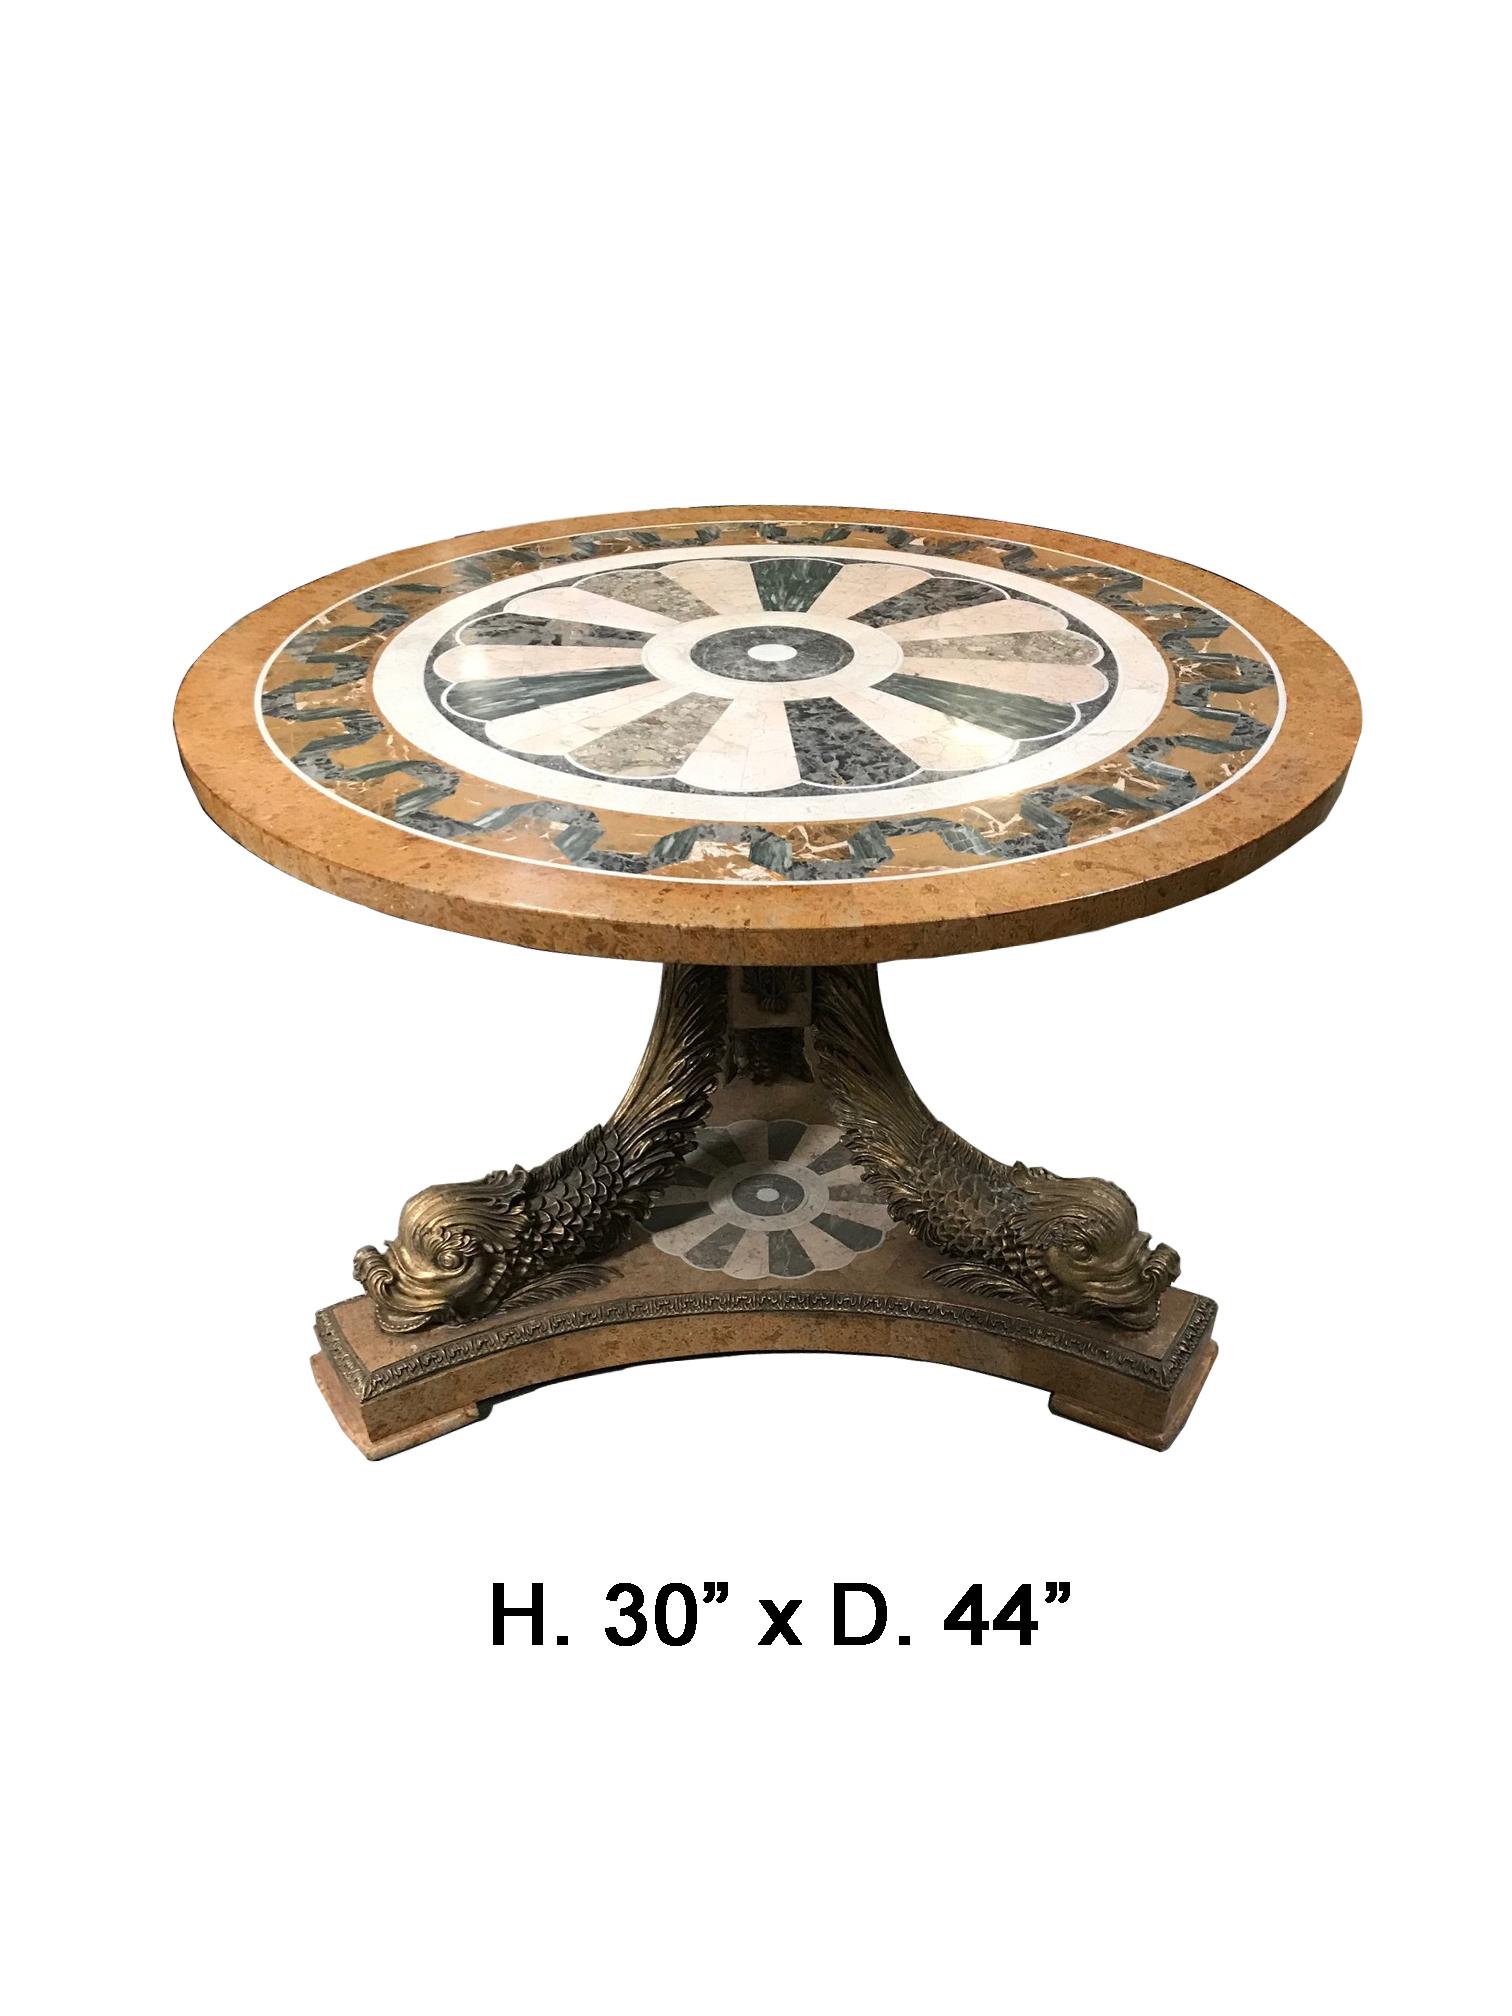 Impressive Italian marble inlaid round pedestal table.
The round top is beautifully veneered and inlaid with various marbles in a very attractive design resting on a tripod pedestal with three beautiful resin gilded dolphins centered with inlaid